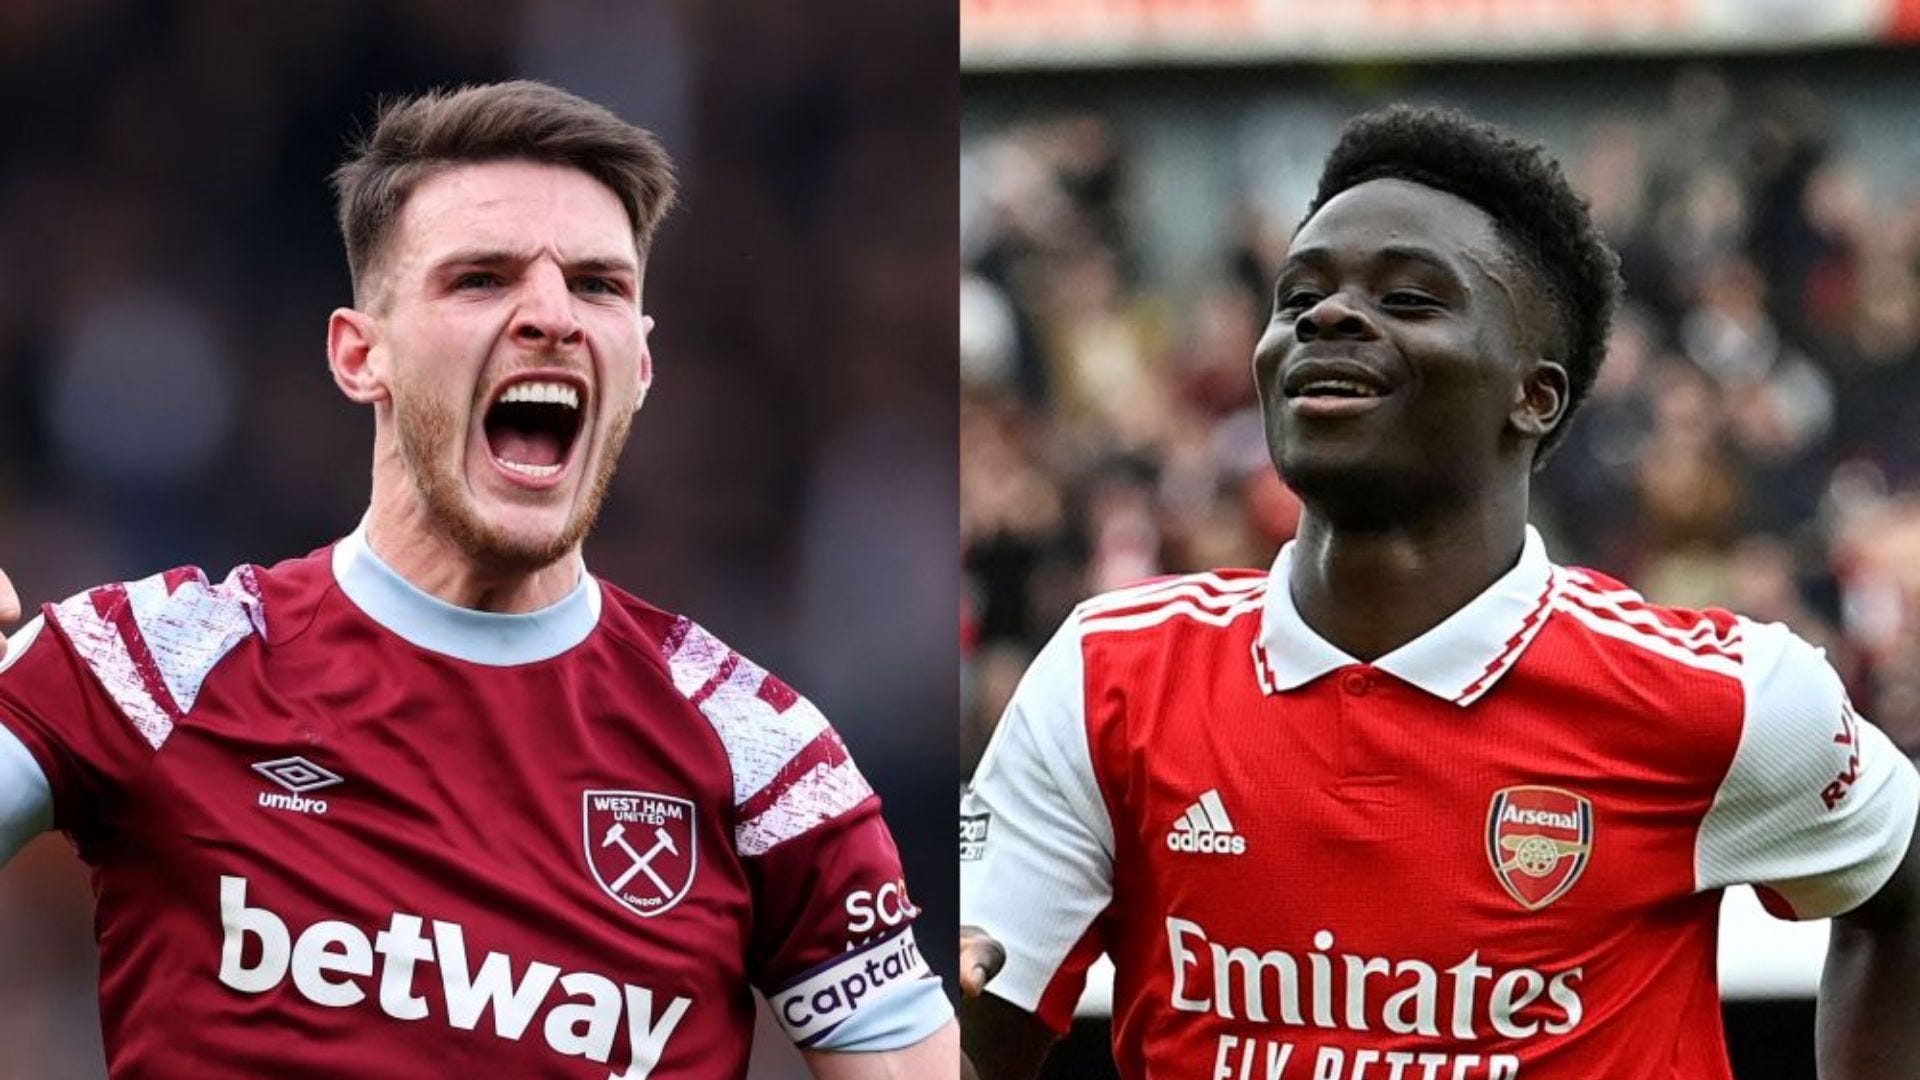 West Ham vs Arsenal Where to watch the match online, live stream, TV channels and kick-off time Goal